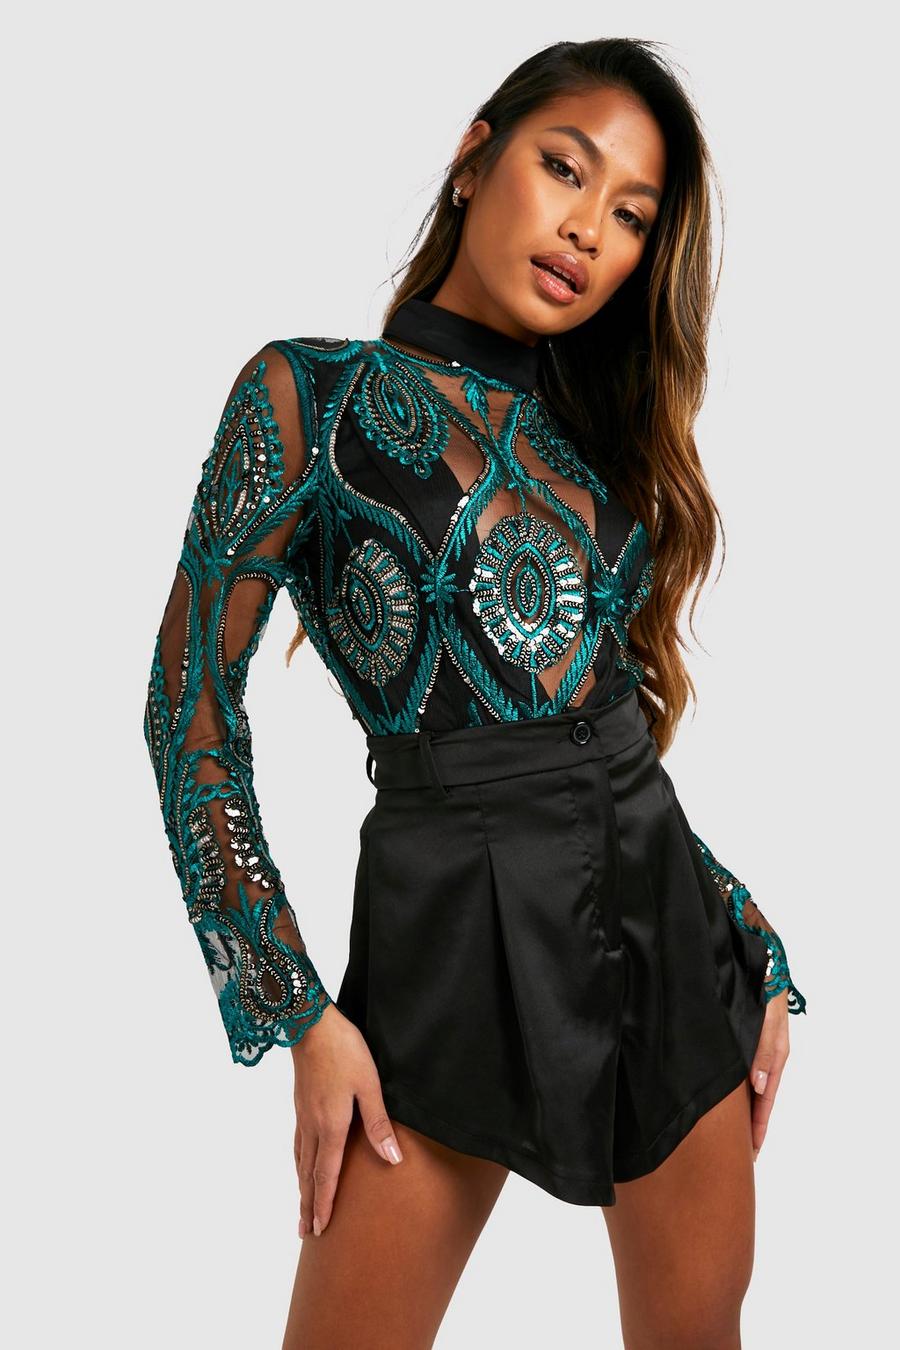 Buy 2Xtremz Embellished Bodysuit with High Neck and Long Sleeves